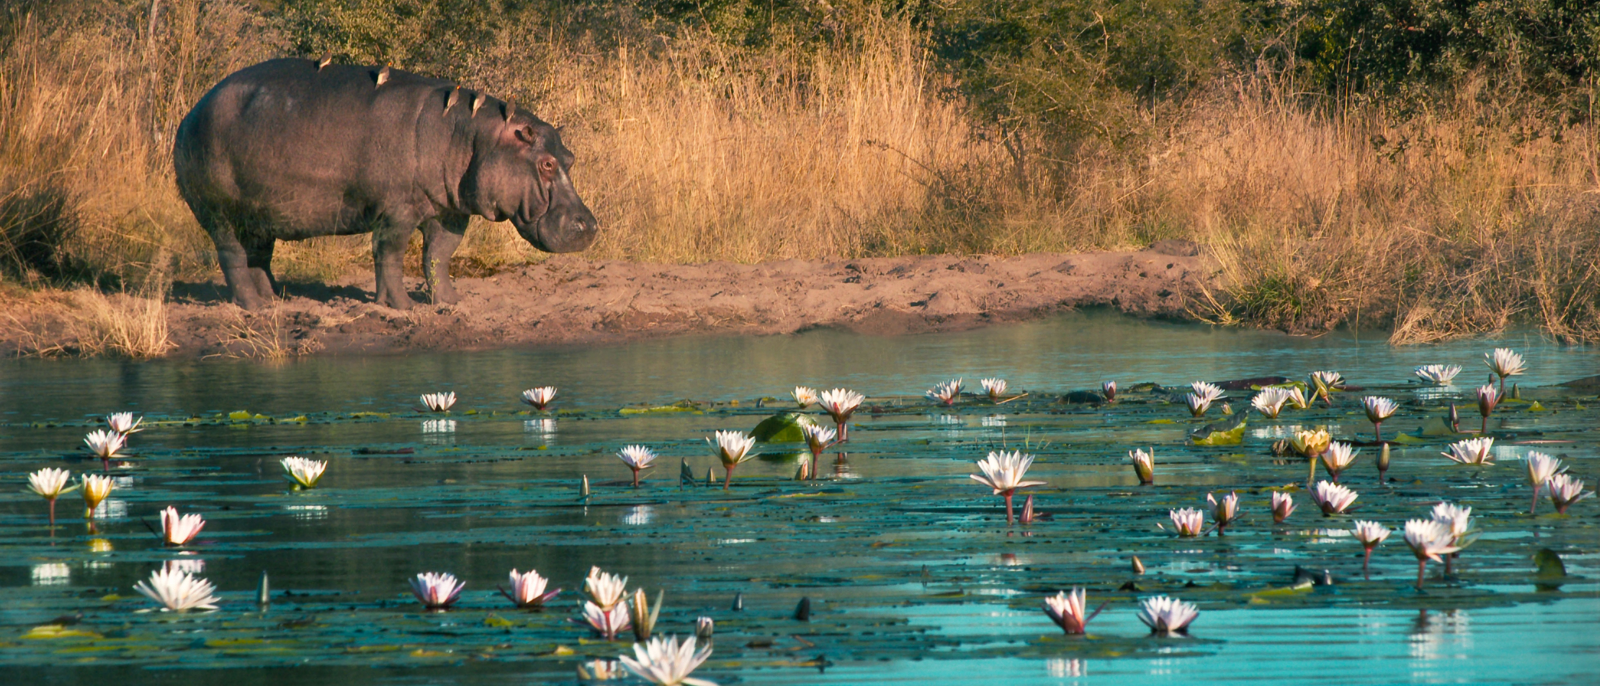 Hippopotamus (Hippopotamus amphibius) standing on riverbank with birds resting on its back looks at the river with flowers floating in the water, Kwando River, Kongola, Caprivi Strip, northeastern Namibia, Africa